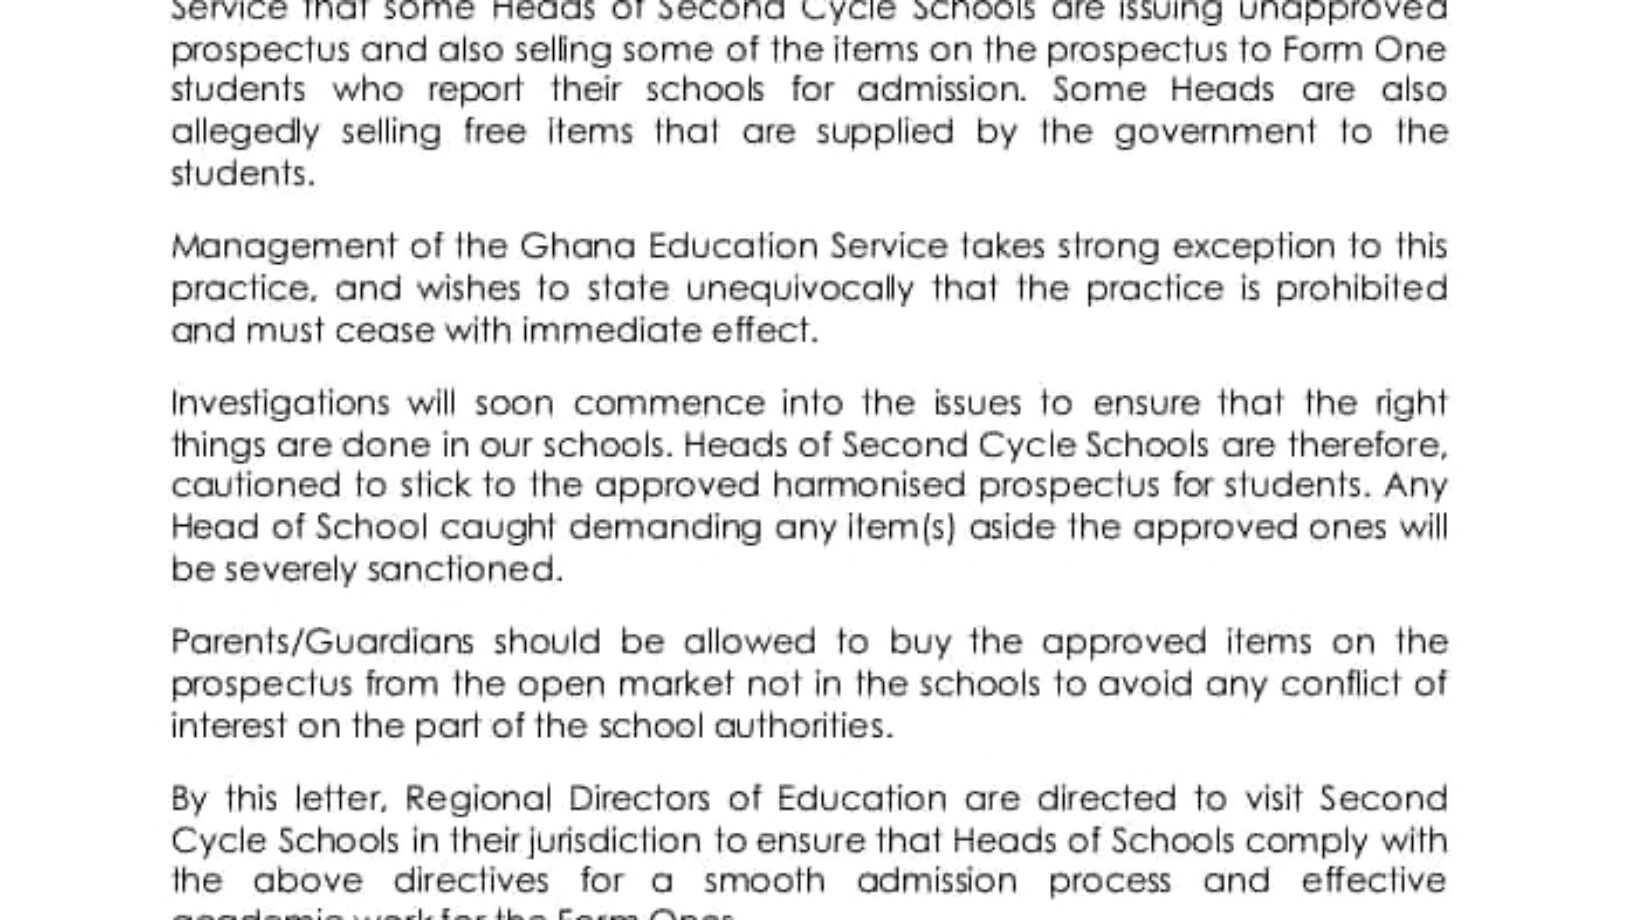 GES to sanction Heads of SHSs demanding and selling unapproved prospectus items to Form One students severely